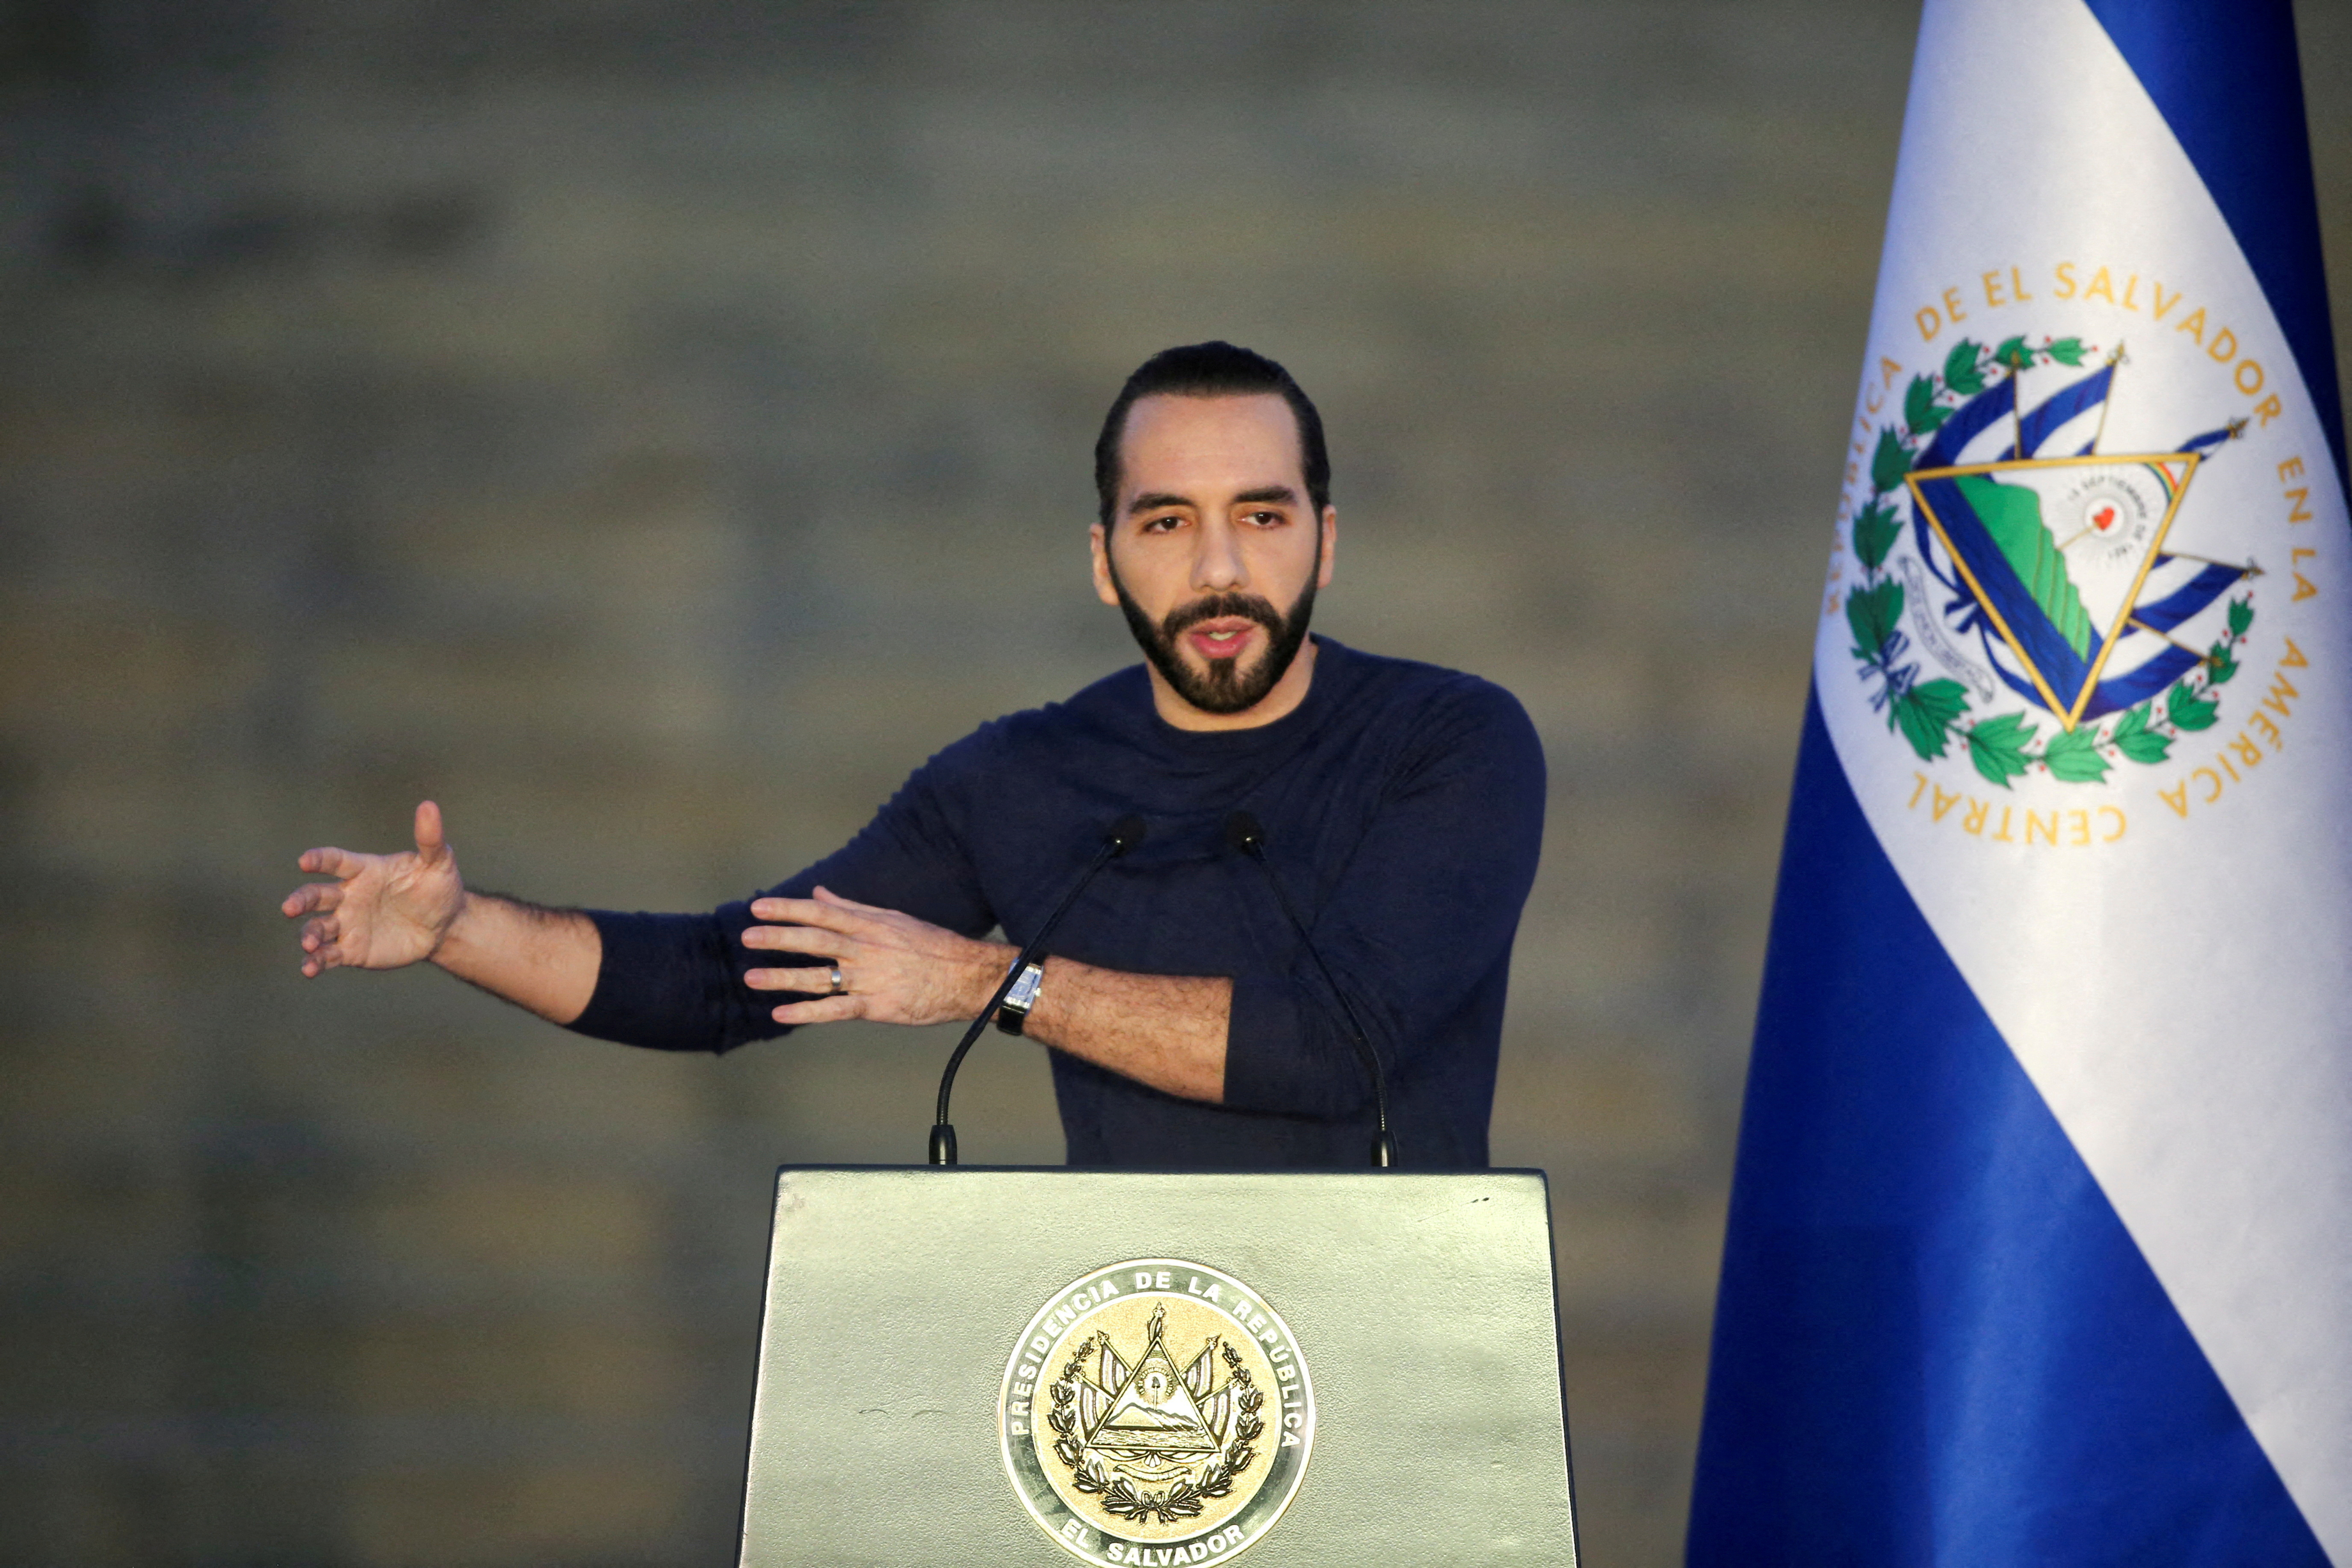 El Salvador's Bukele looks set to cruise to controversial